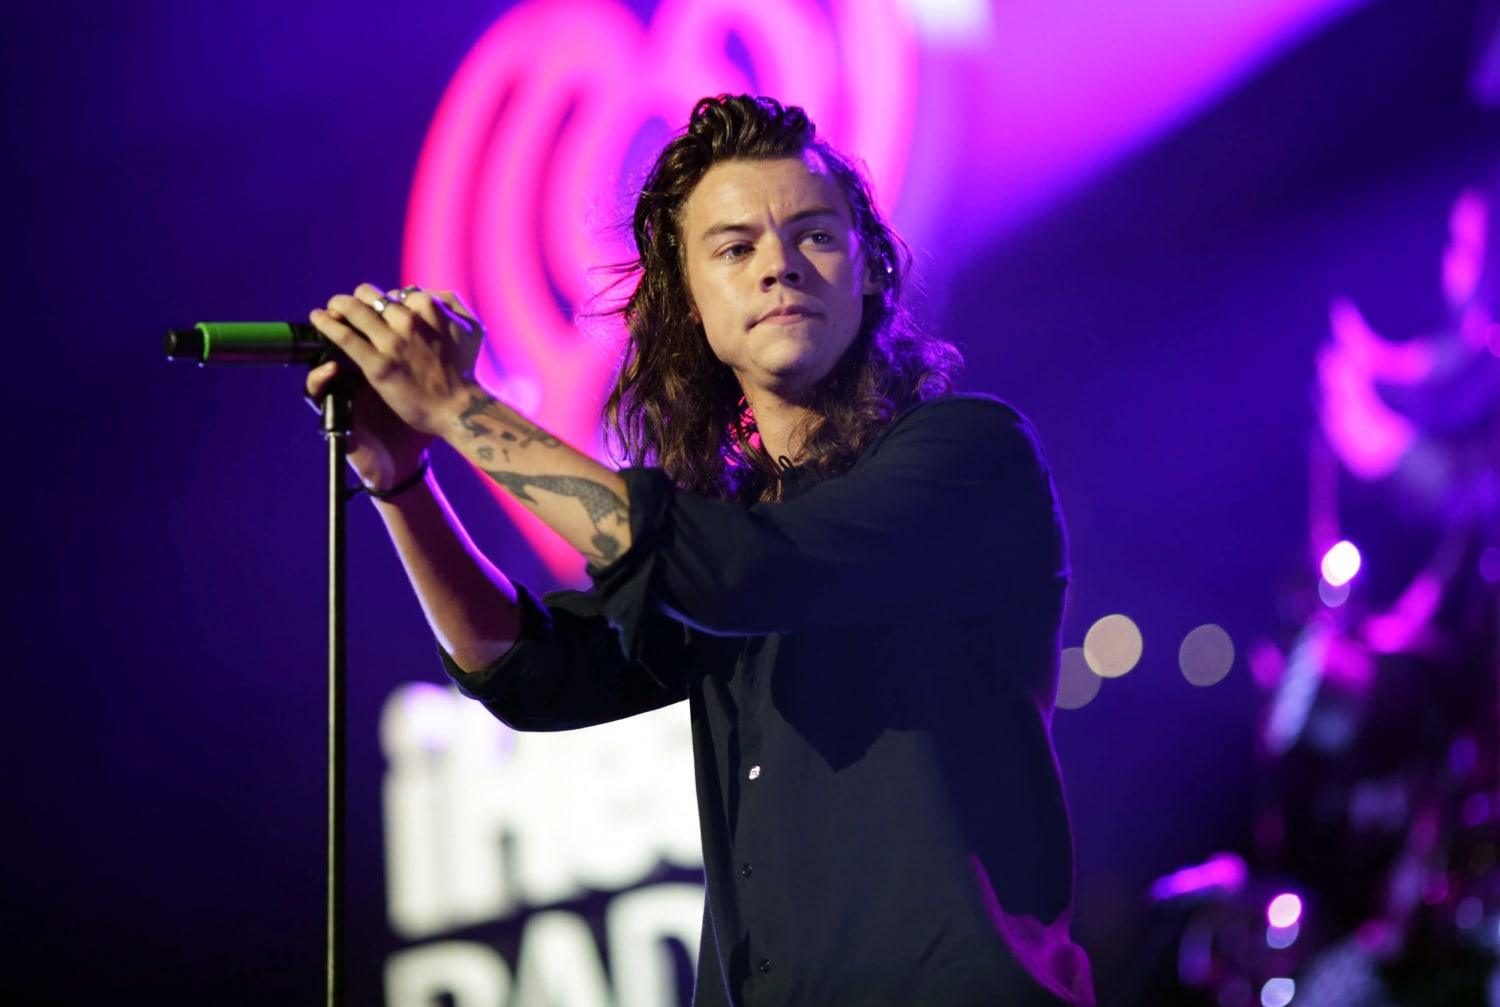 Harry Styles Short Hair Photo Is Totally Unexpected  StyleCaster